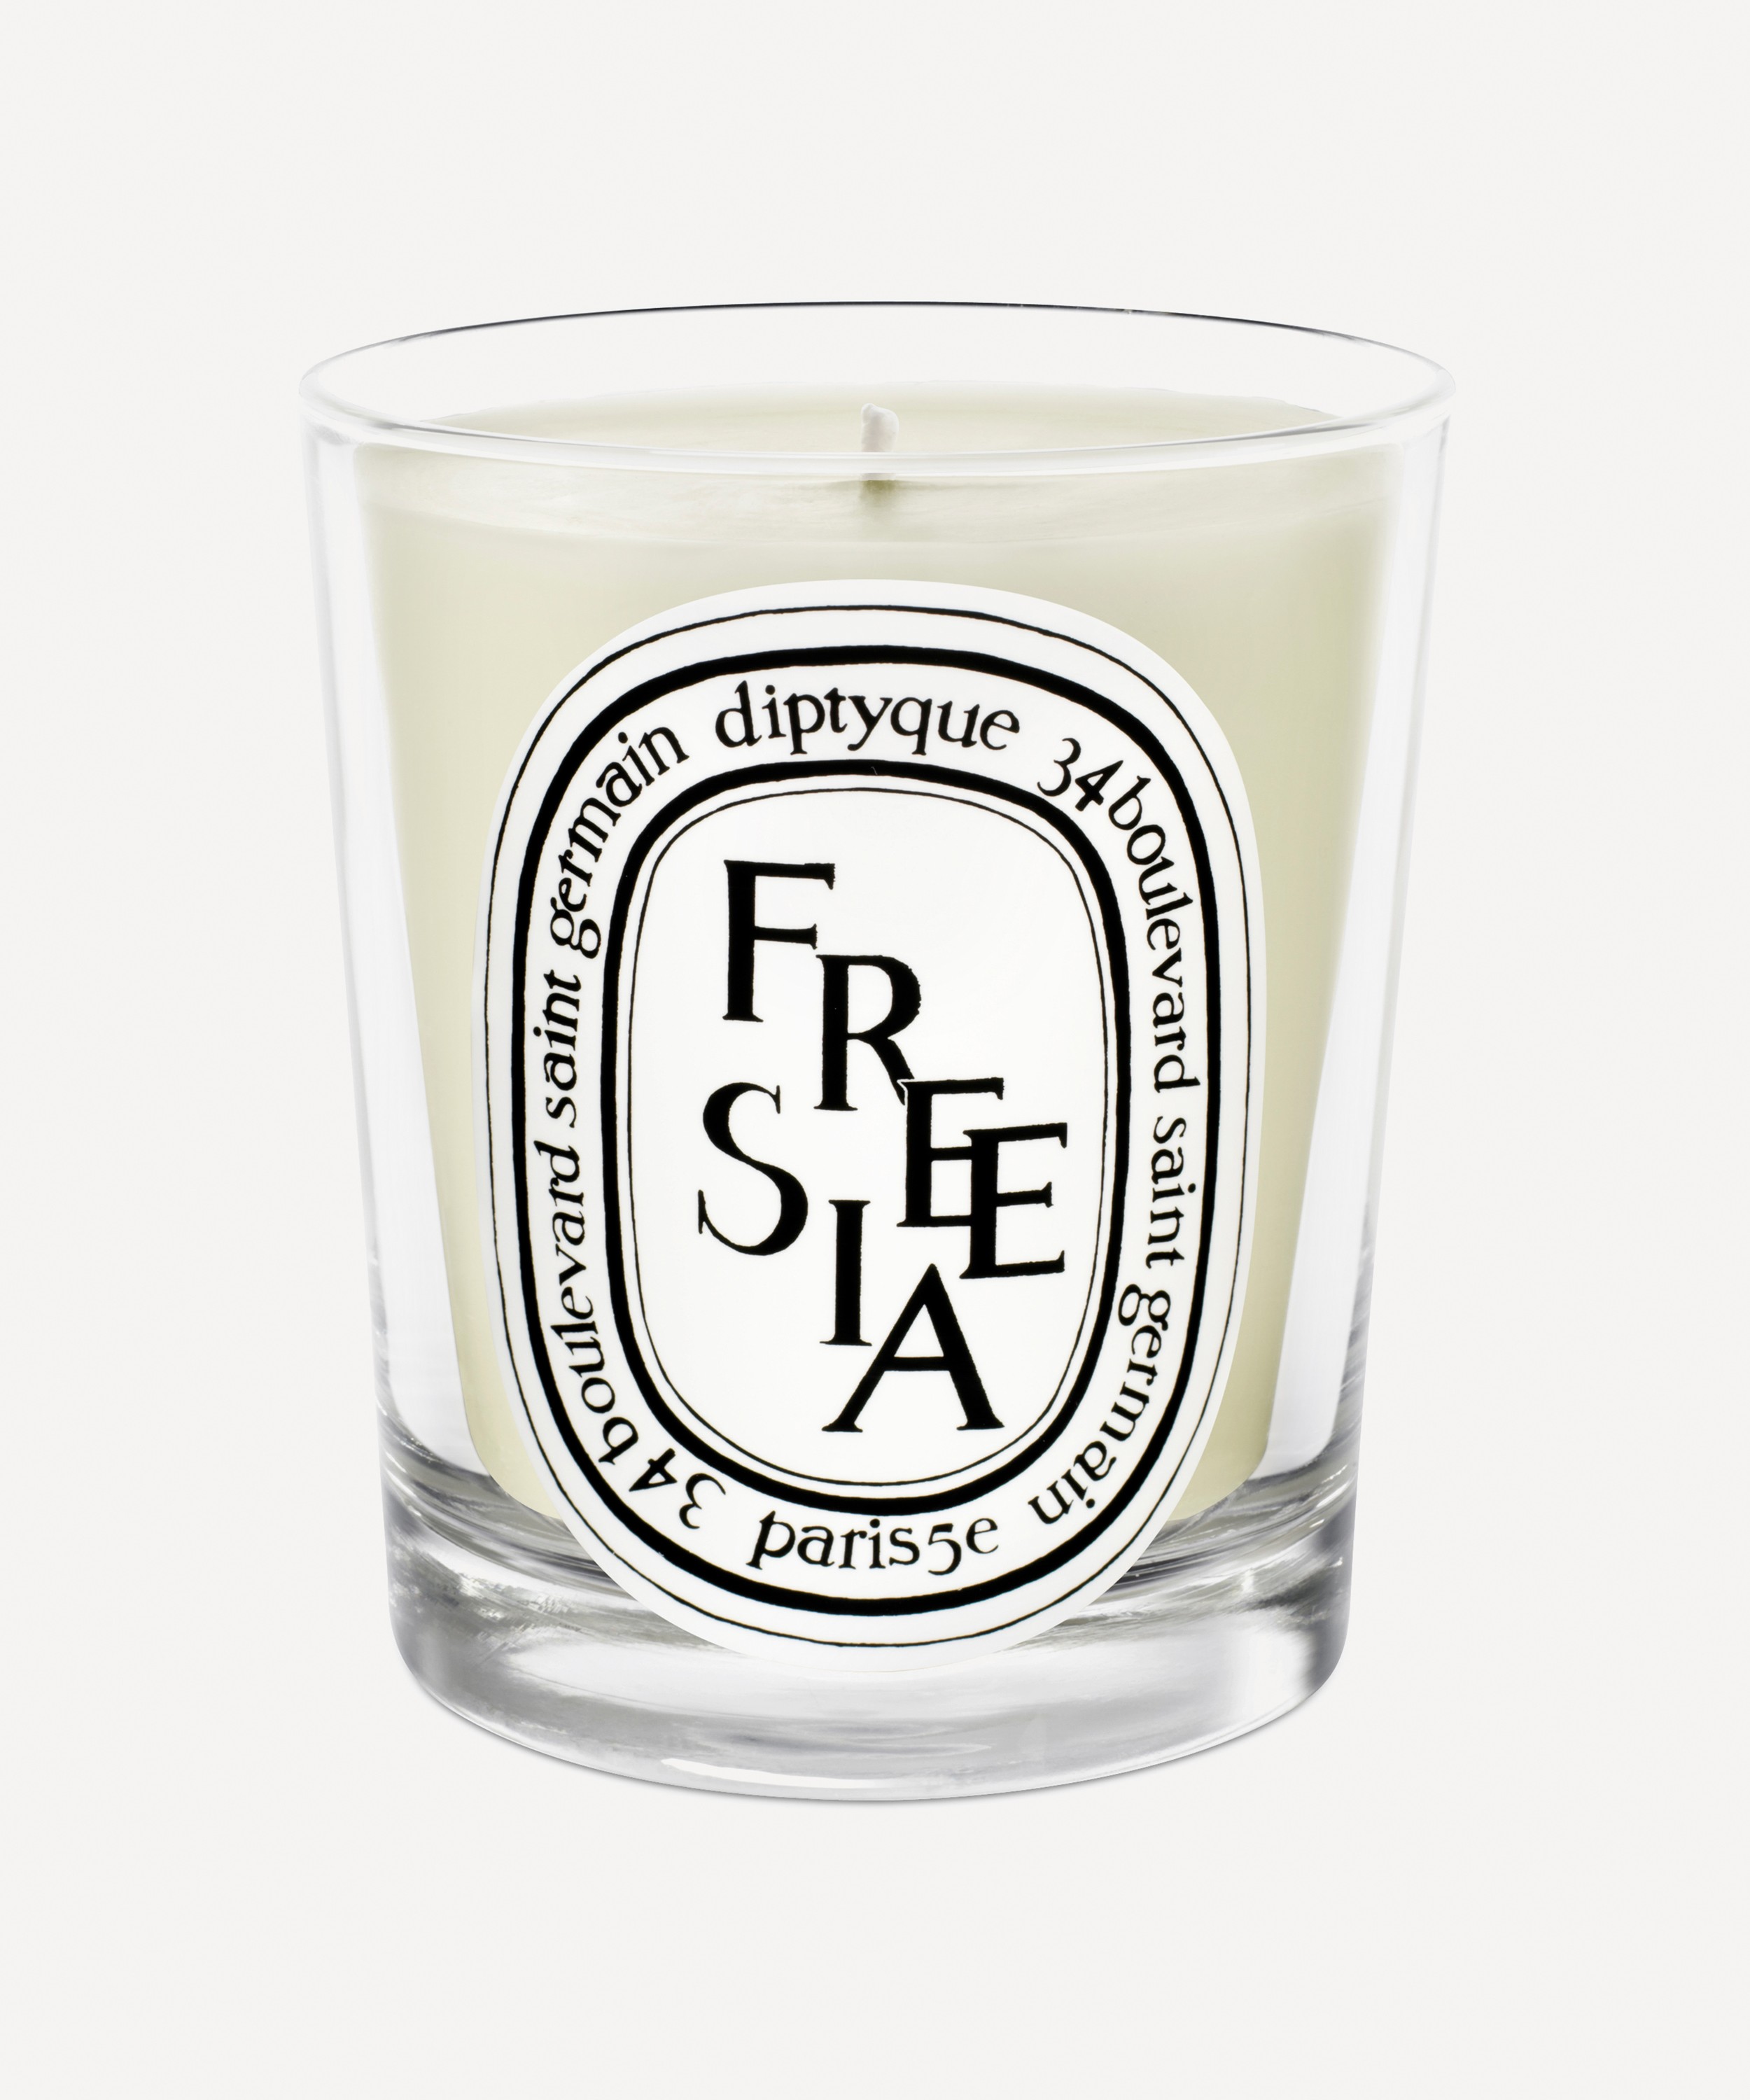 Diptyque - Freesia Scented Candle 190g